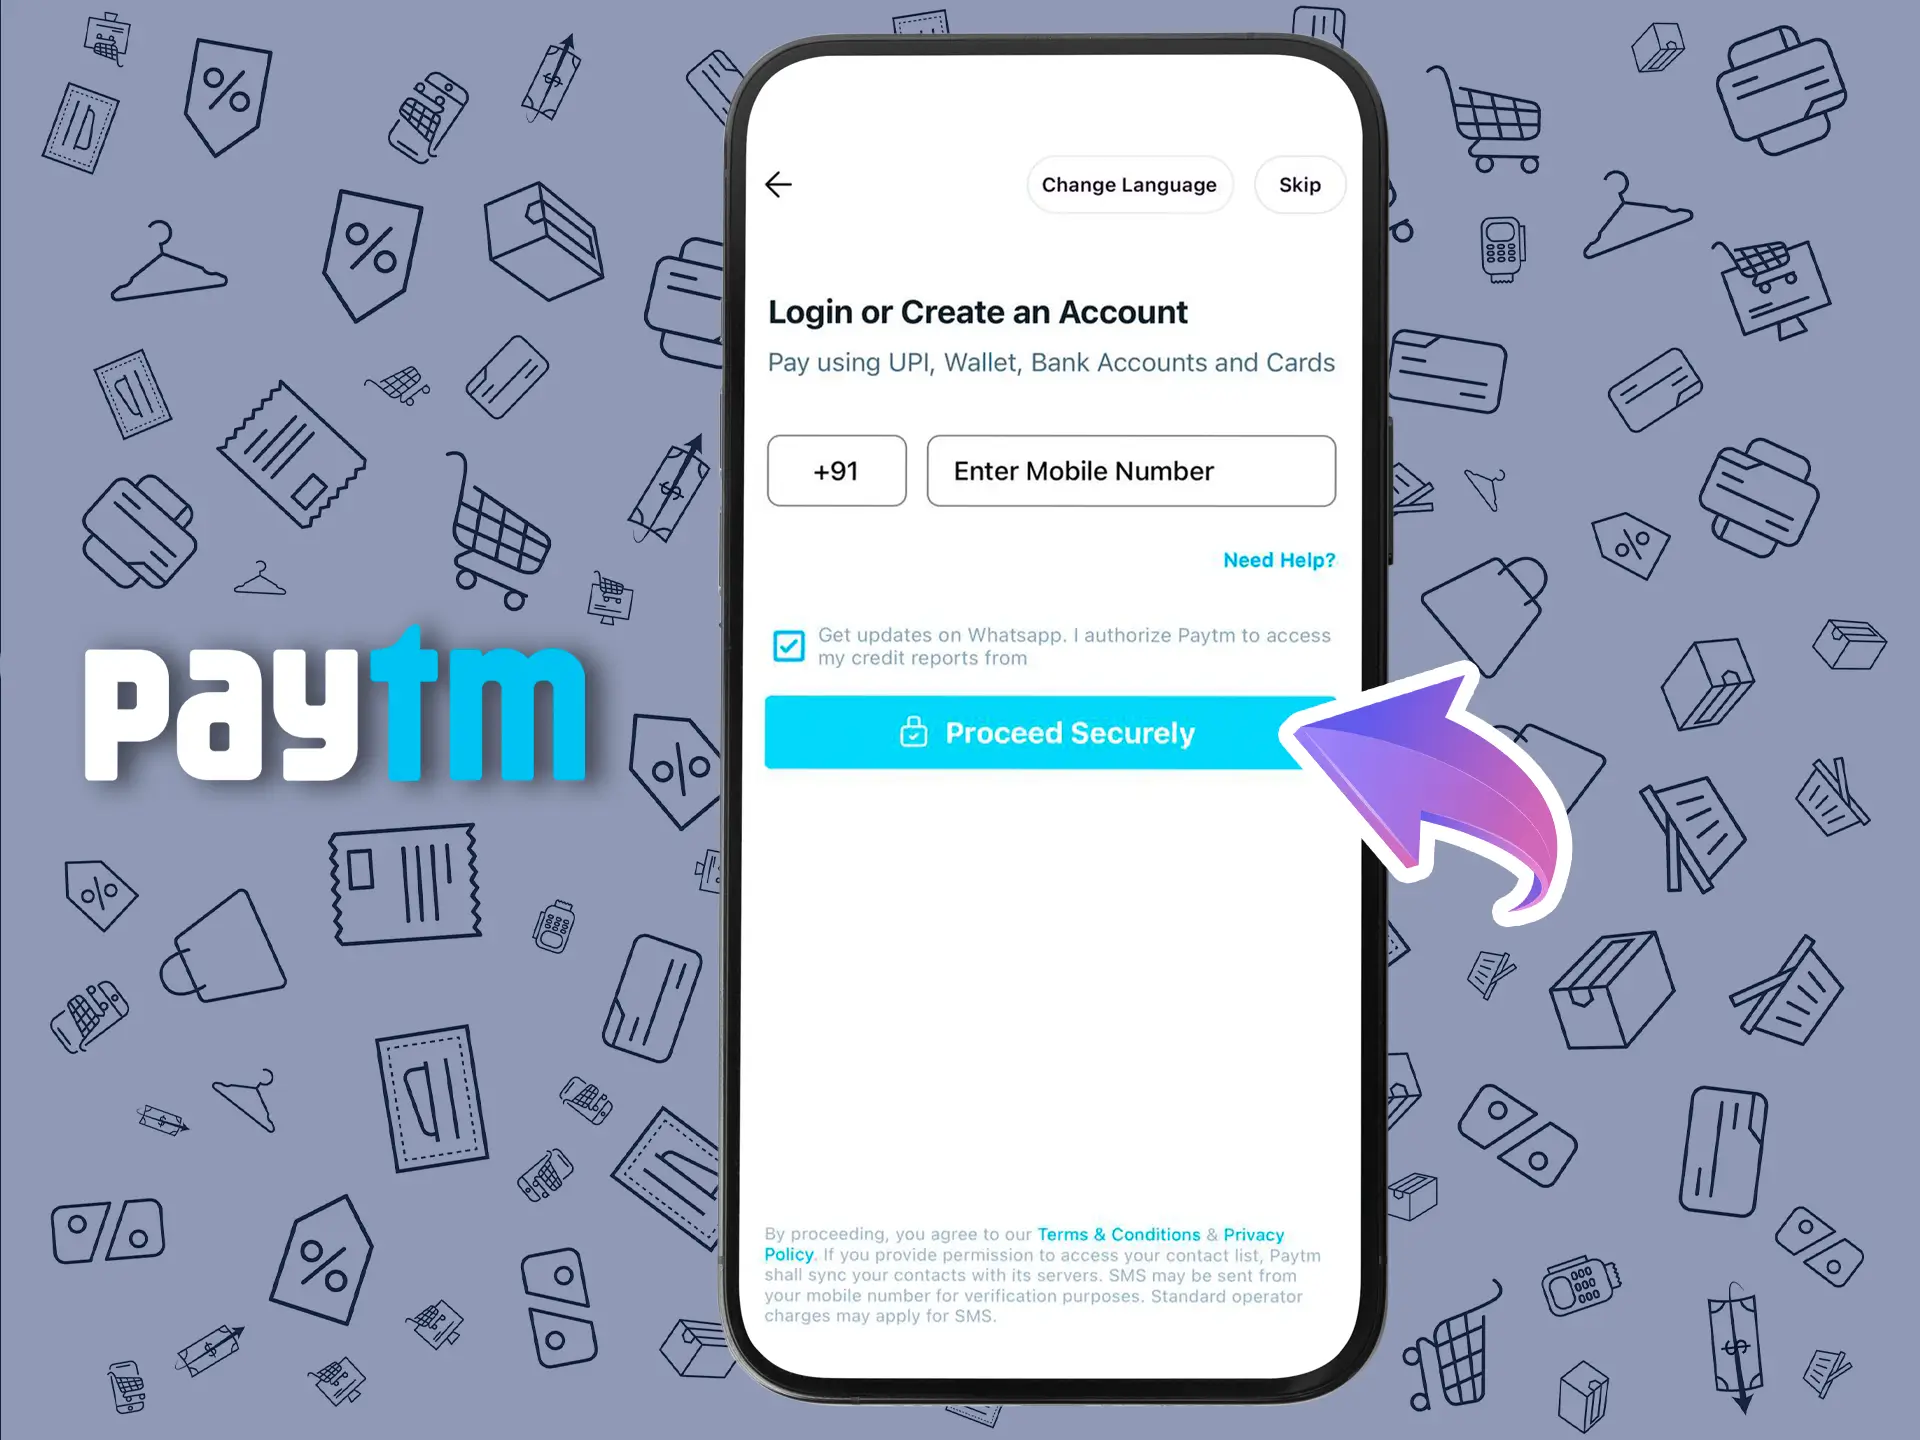 Perform a simple registration in the PayTm app using your mobile phone number.